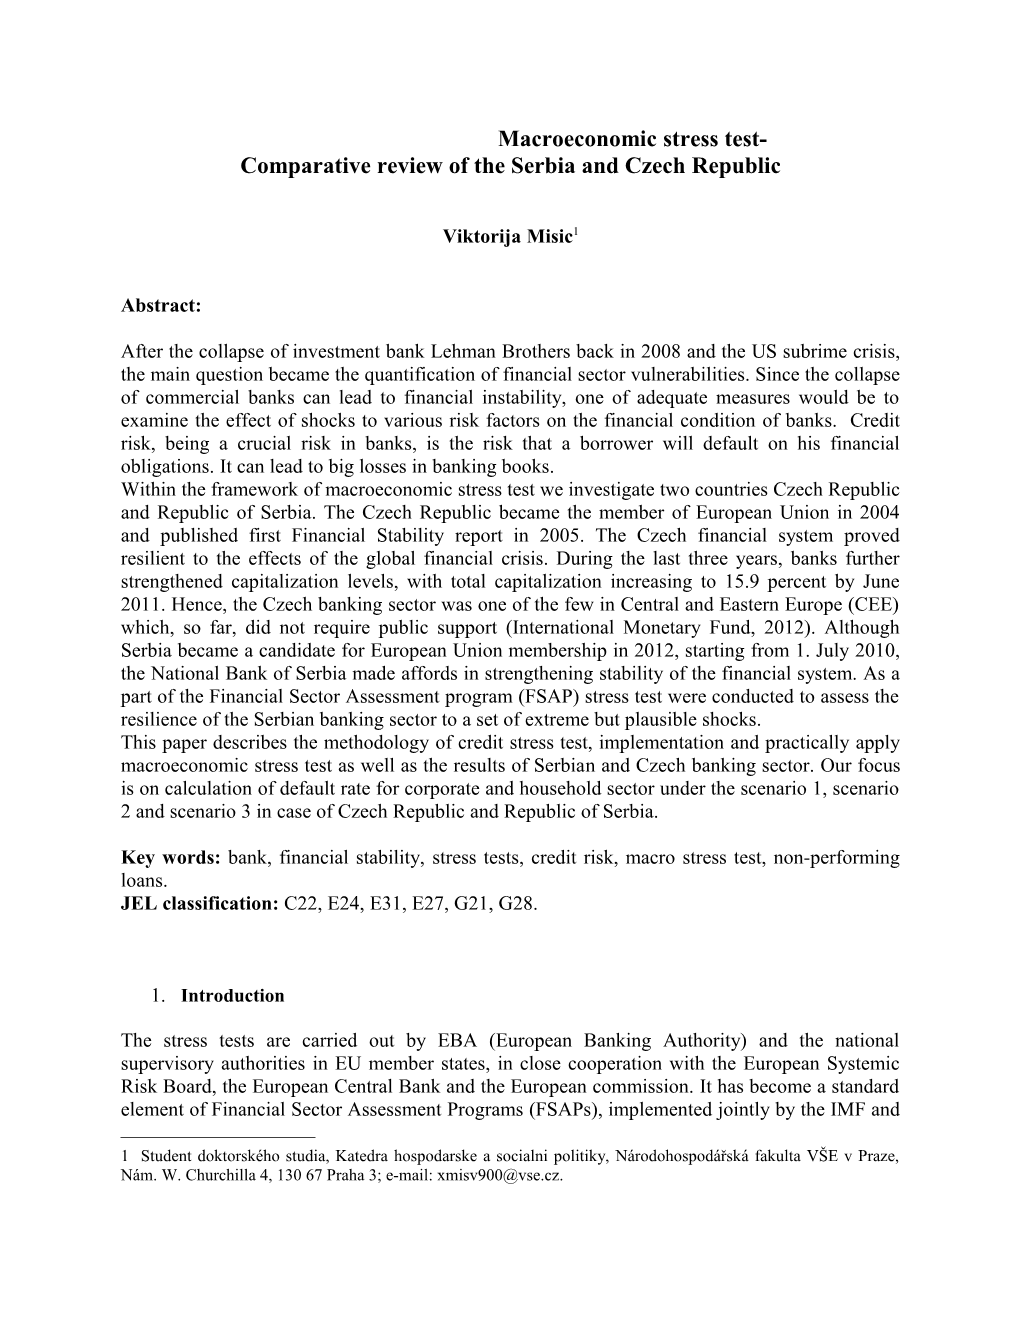 Comparative Review of the Serbia and Czech Republic